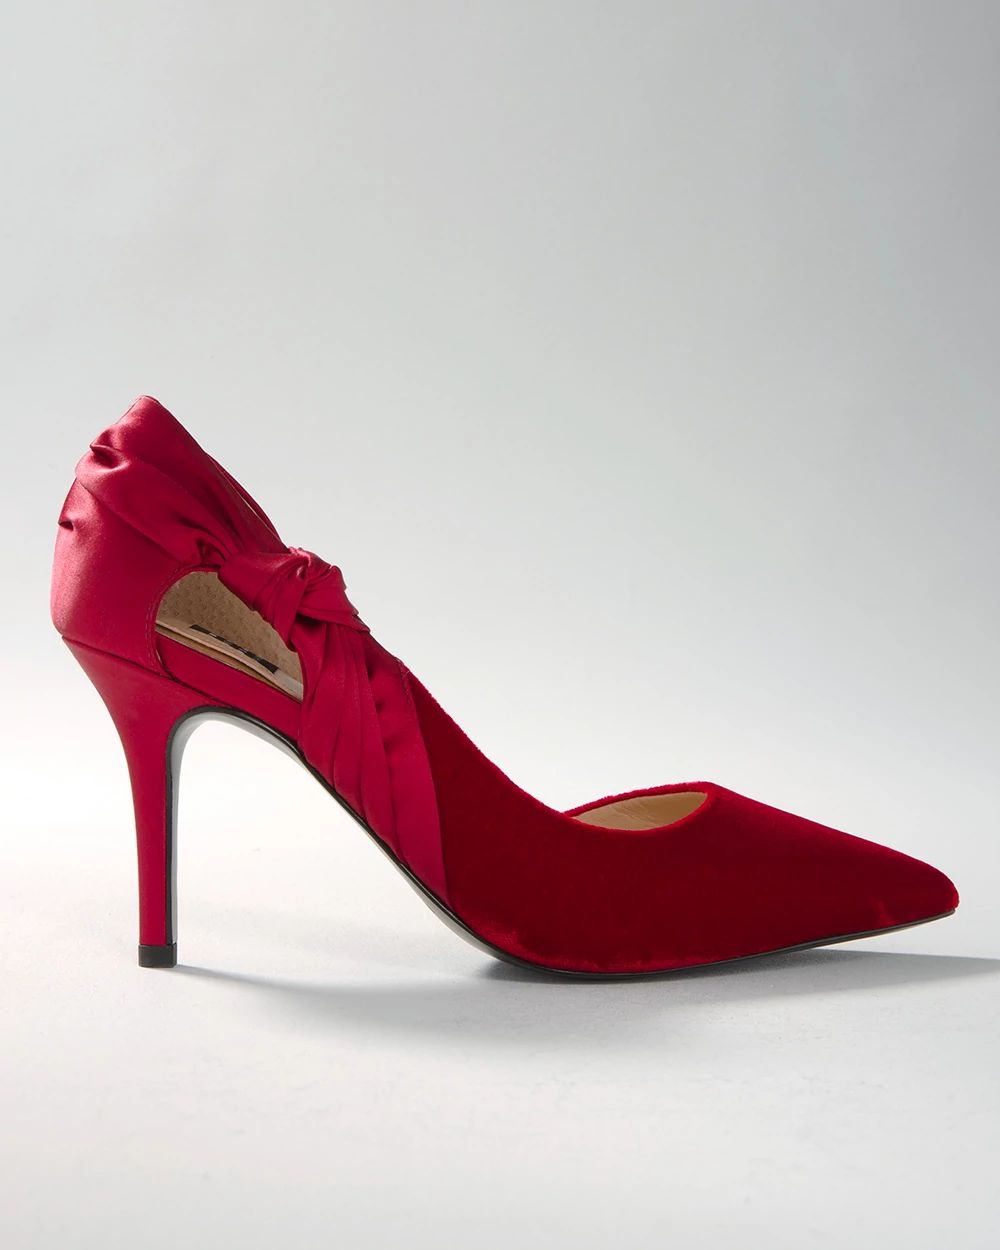 Red Velvet Mid-Heel Pump click to view larger image.